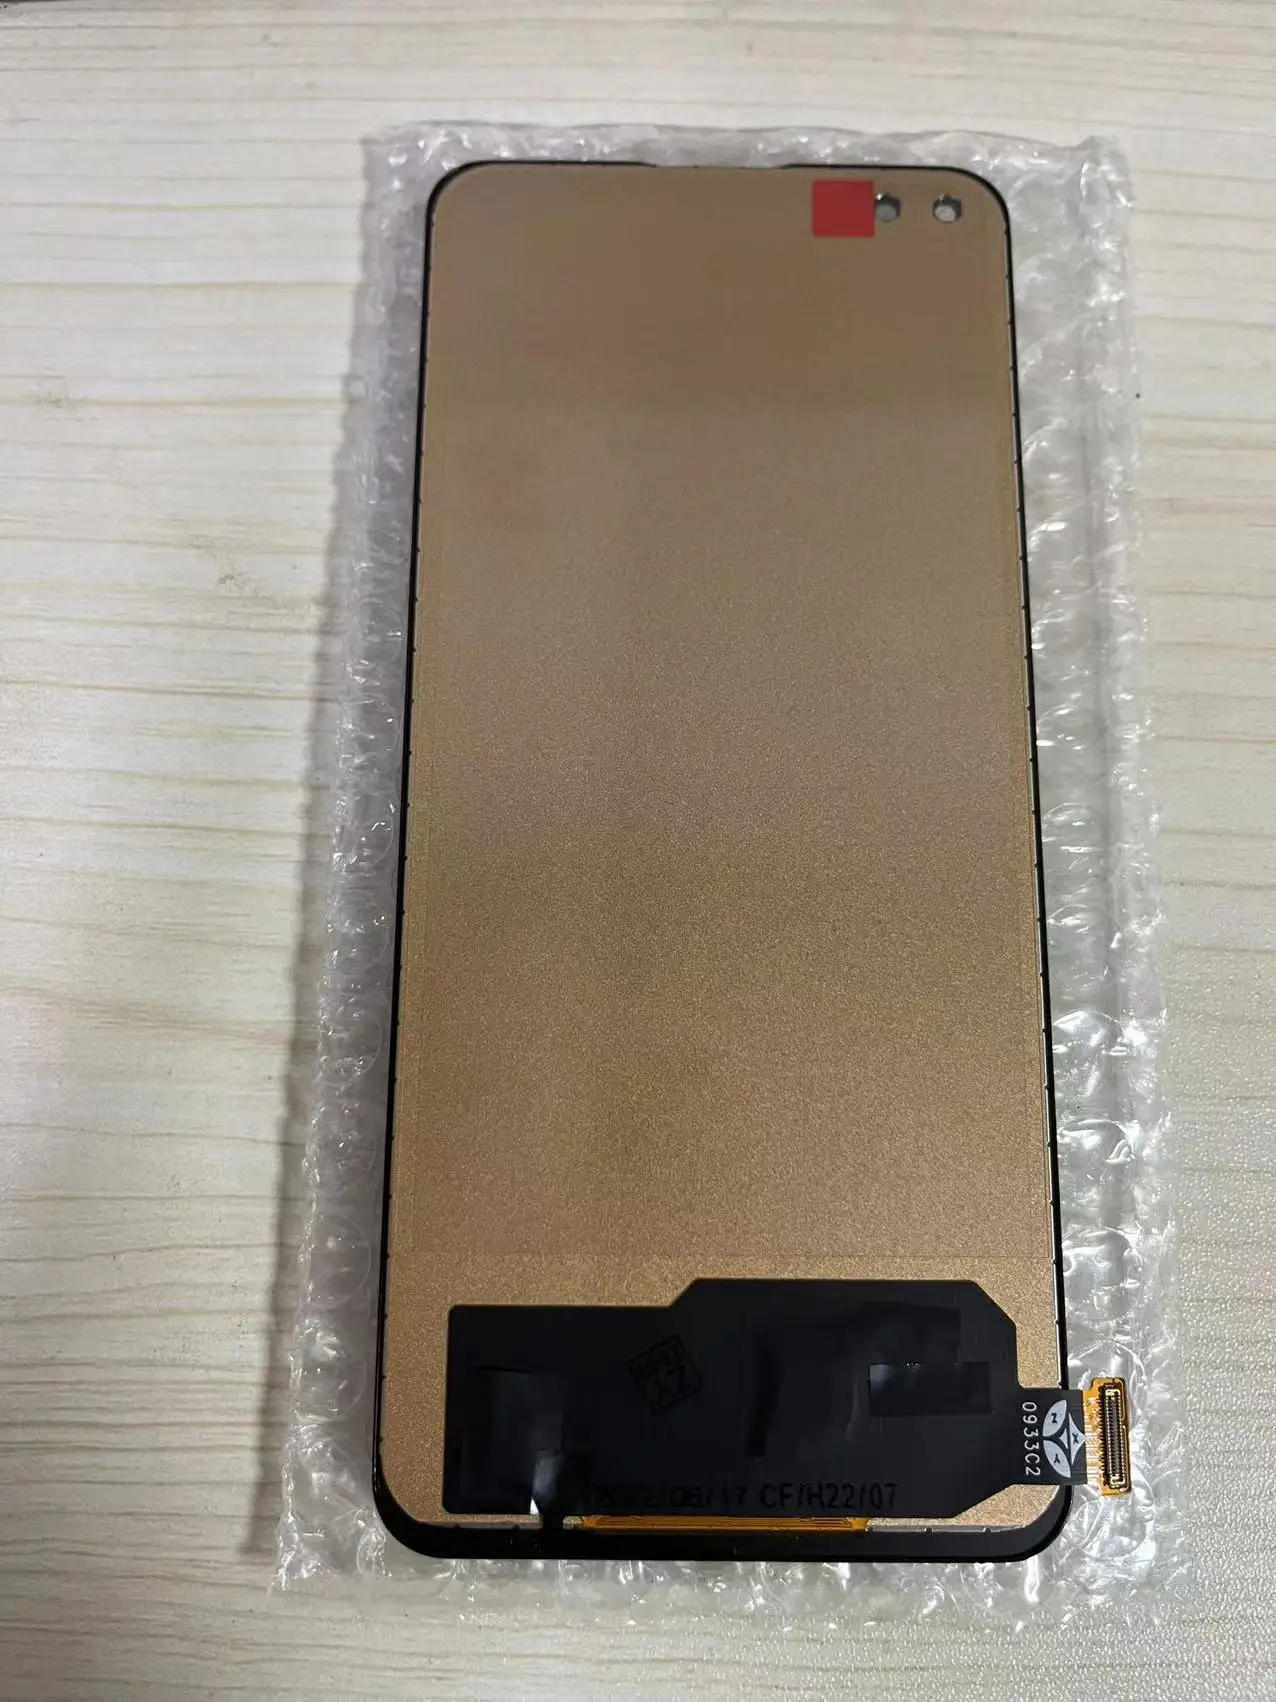 Super AMOLED For Oppo Reno4 LCD Display Touch Screen Digitizer Assembly Panel Screen Replace For OPPO Reno 4 reno4 lite CPH2113 enlarge